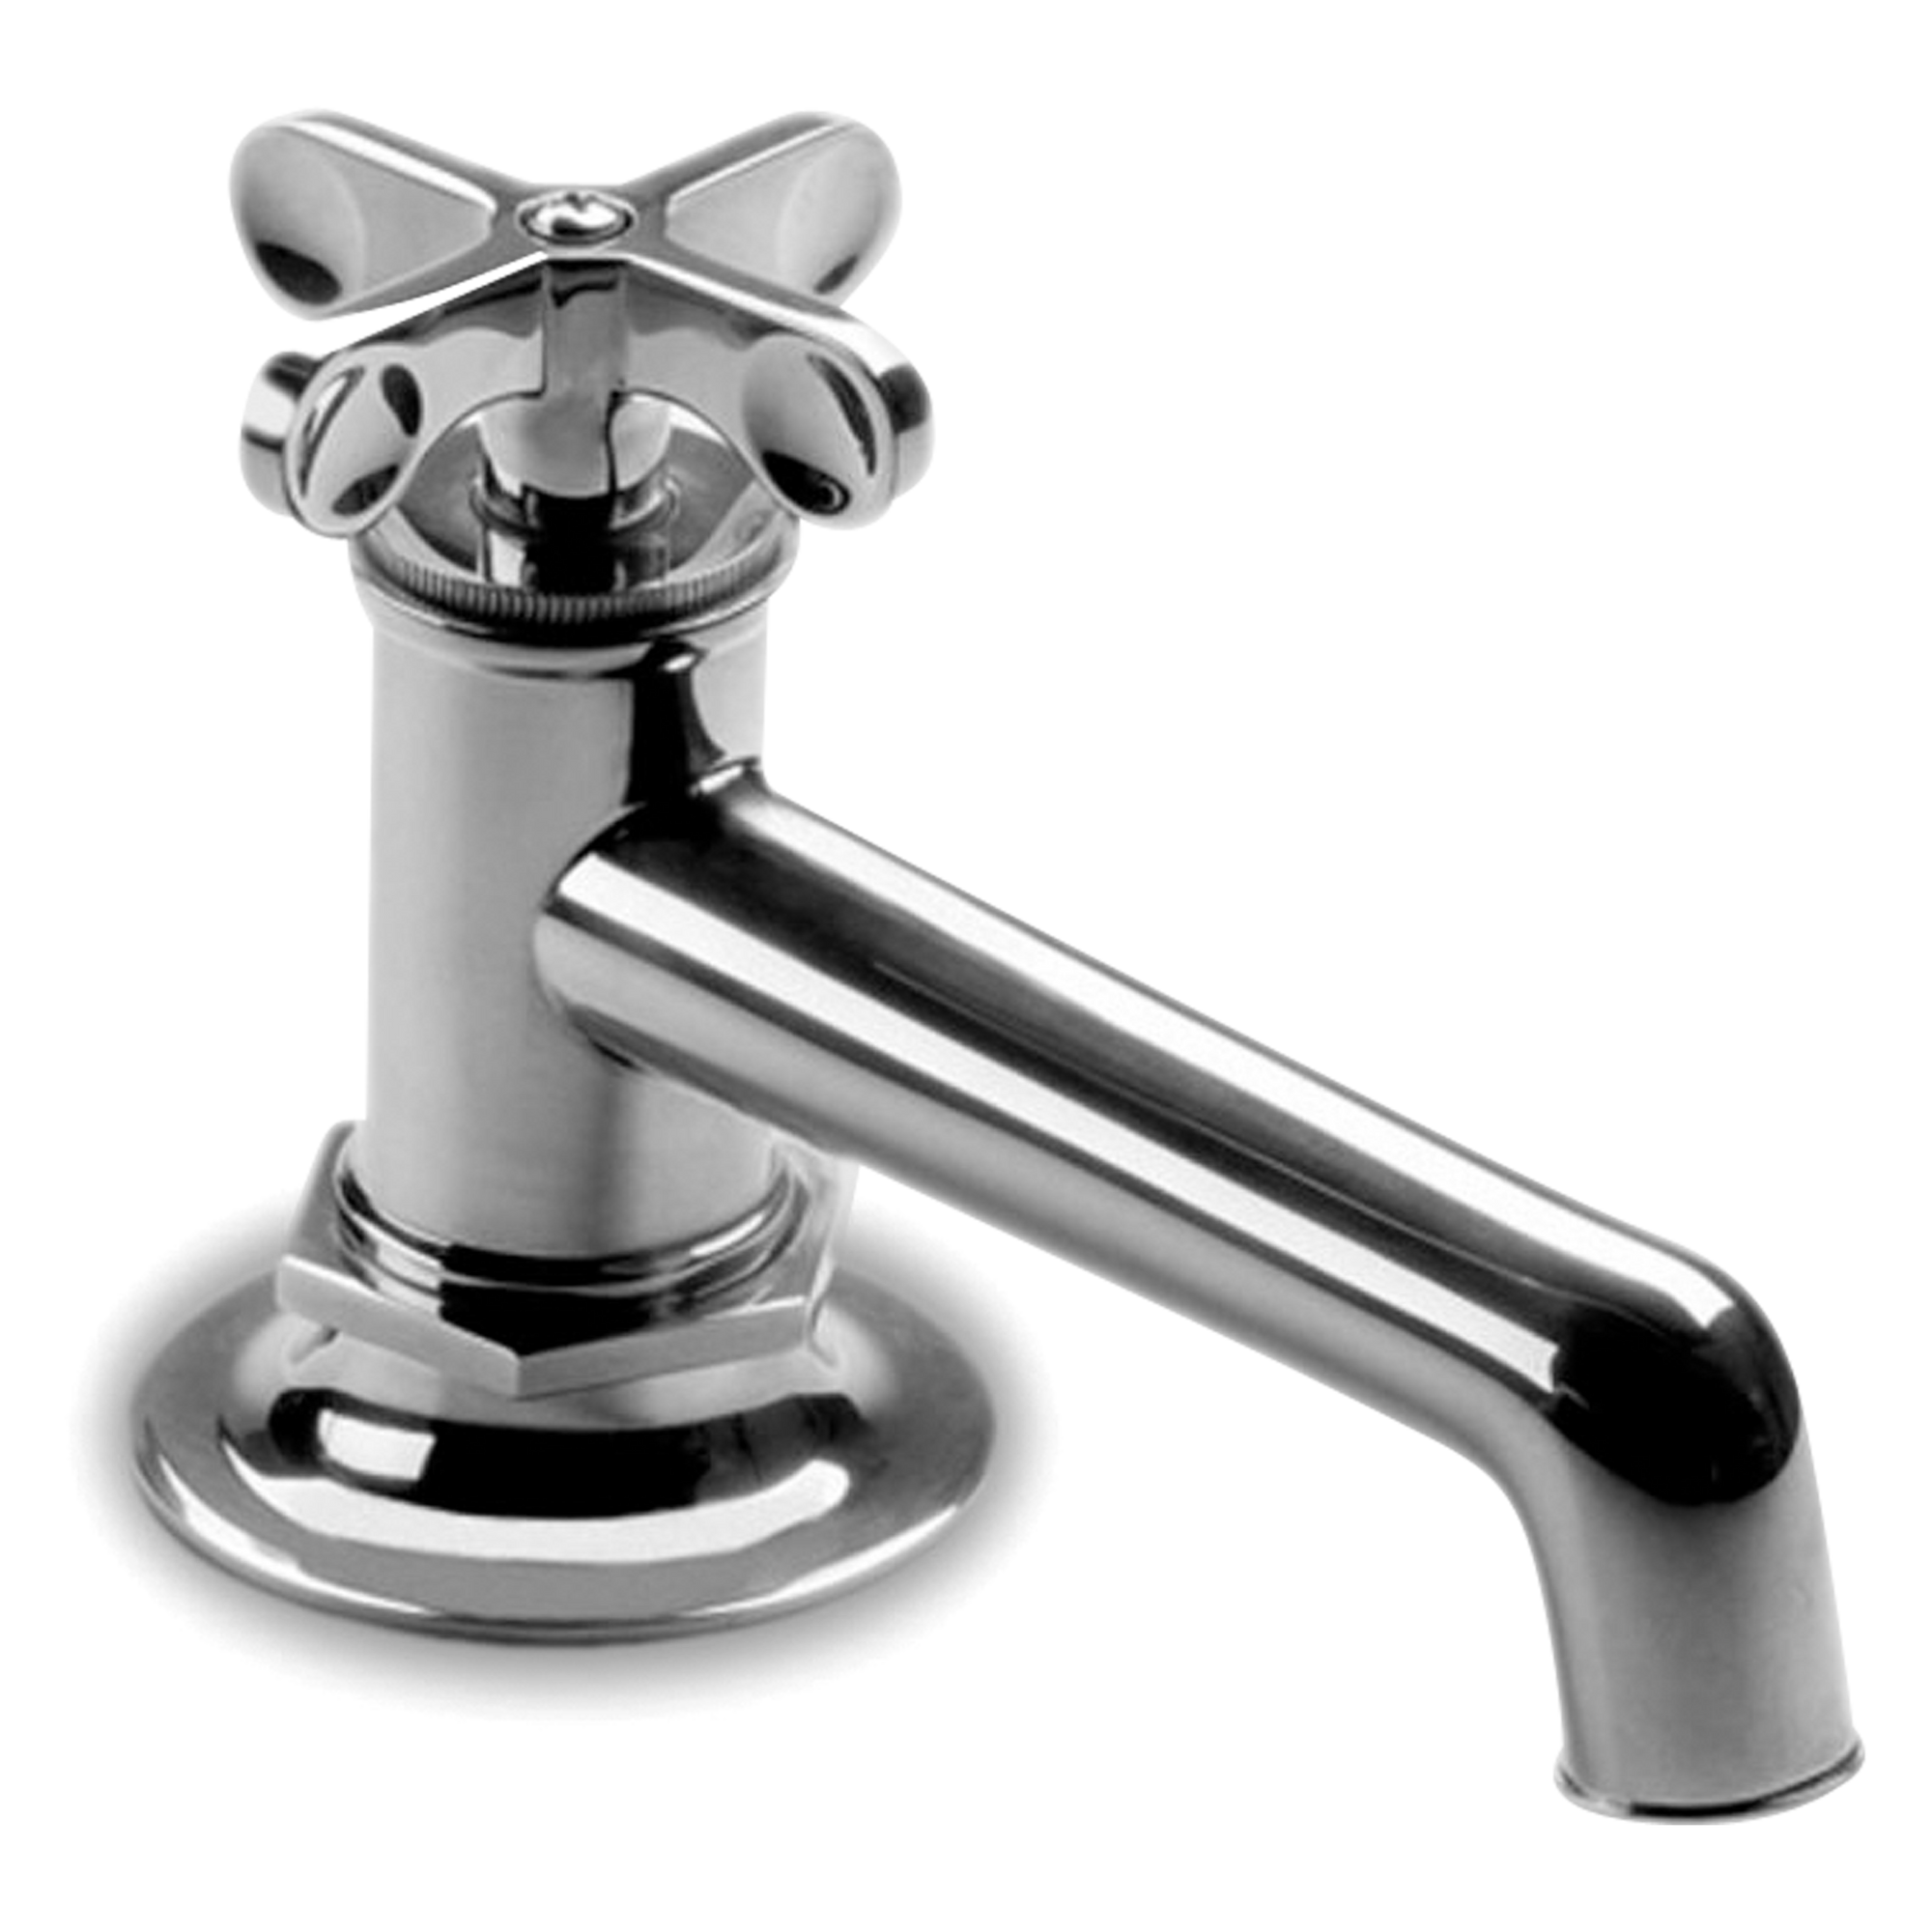 A transitional faucet single-hole faucet with cross handle.